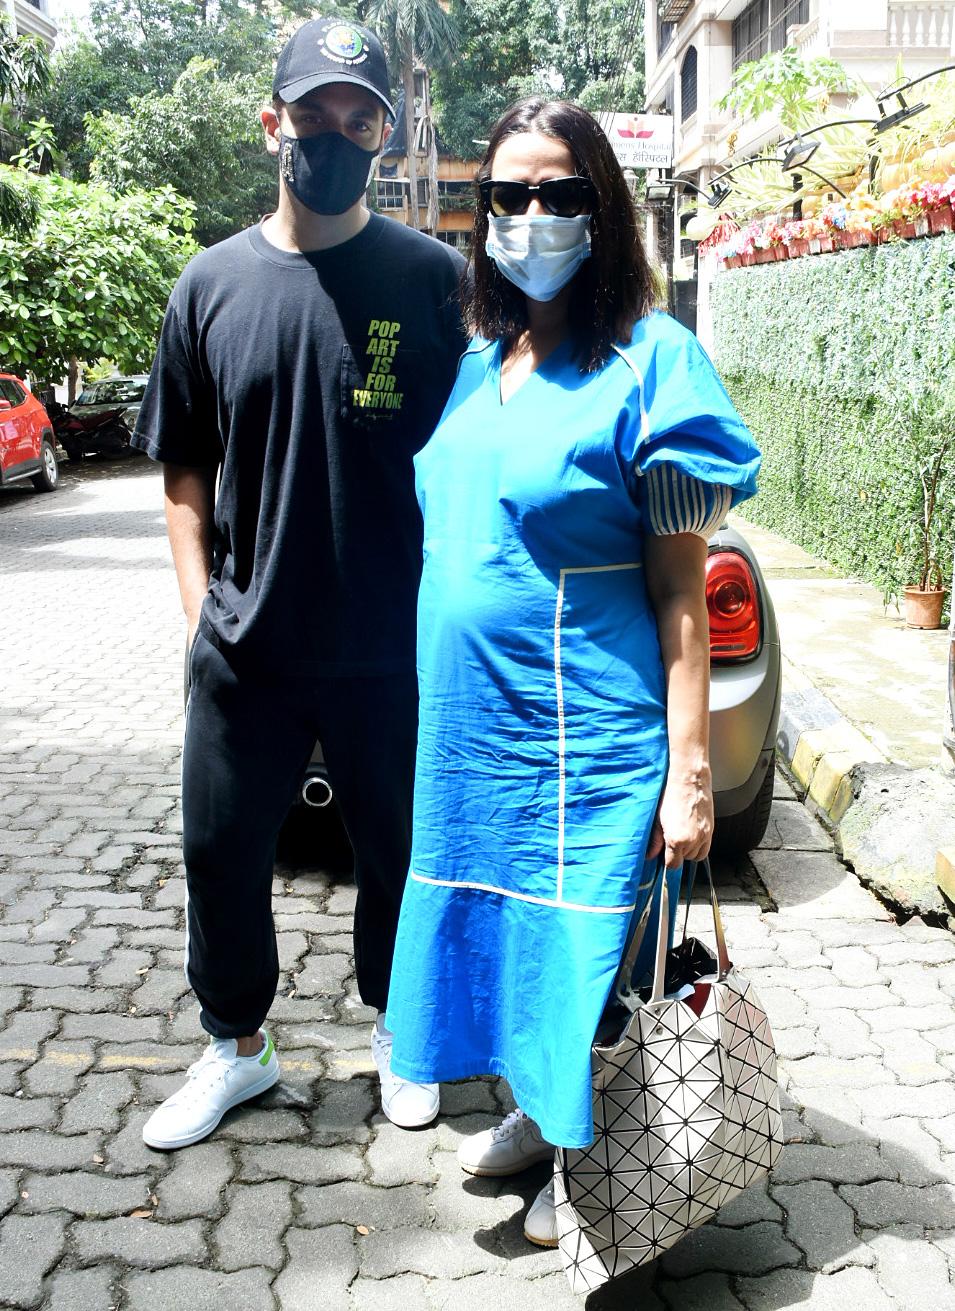 Mom-to-be Neha Dhupia dressed in a blue dress with her husband Angad Bedi was clicked at a popular clinic in Bandra. The couple recently announced second pregnancy. Angad and Neha are parents to two-year-old Mehr Dhupia Bedi. The couple got married in 2018 in Delhi, and they celebrated three years of togetherness back on May 10, 2021.